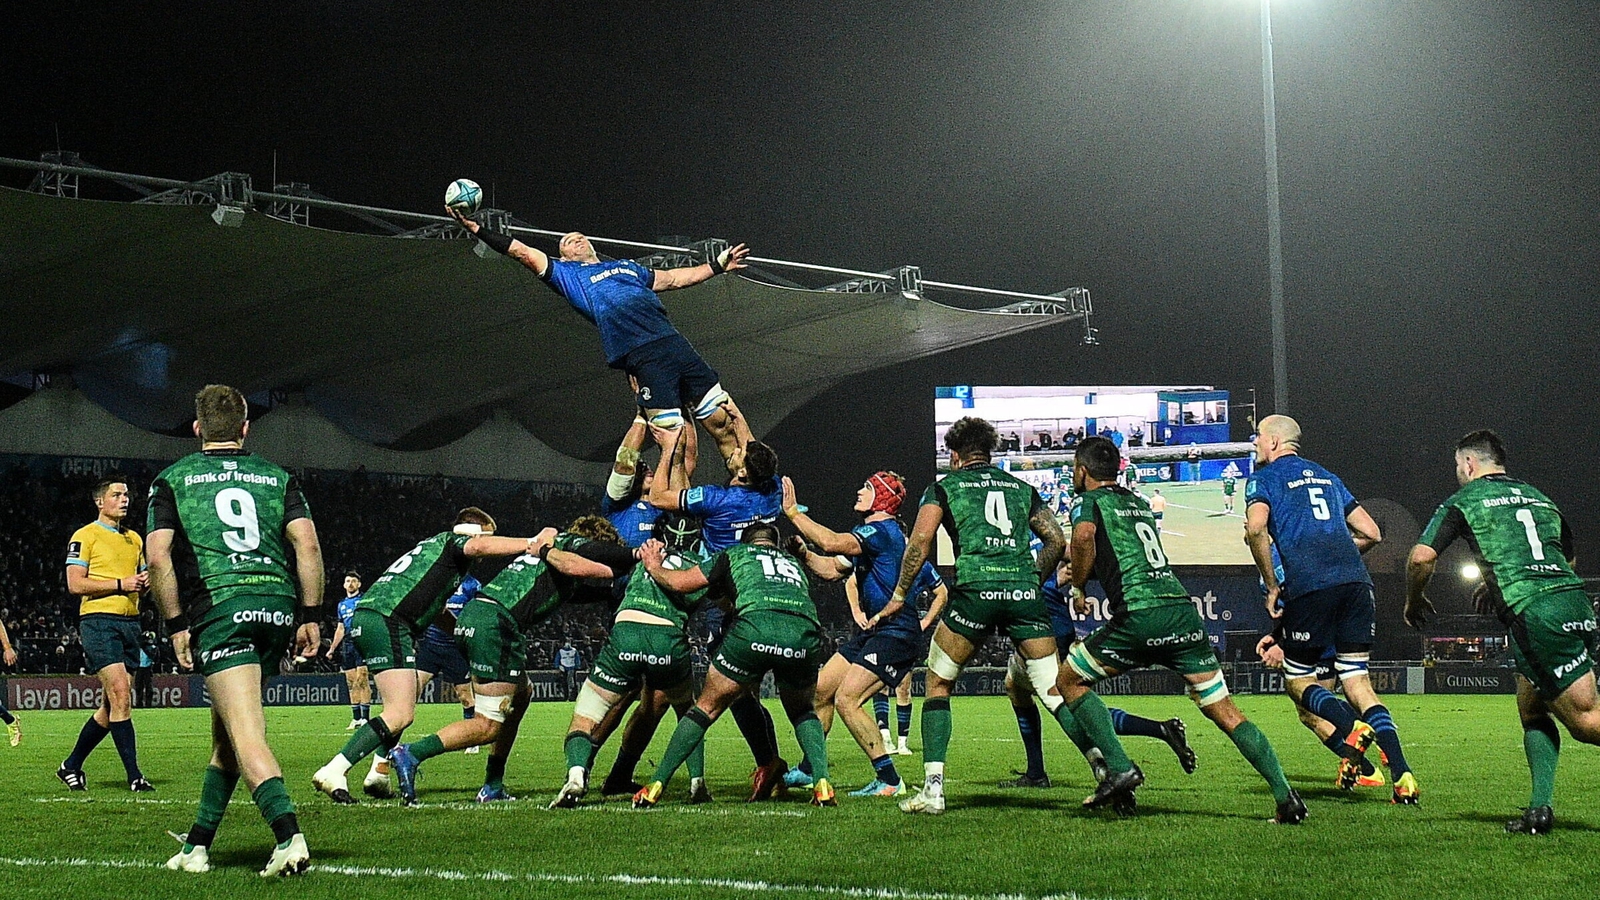 Seven-try Leinster overcome early Connacht surge